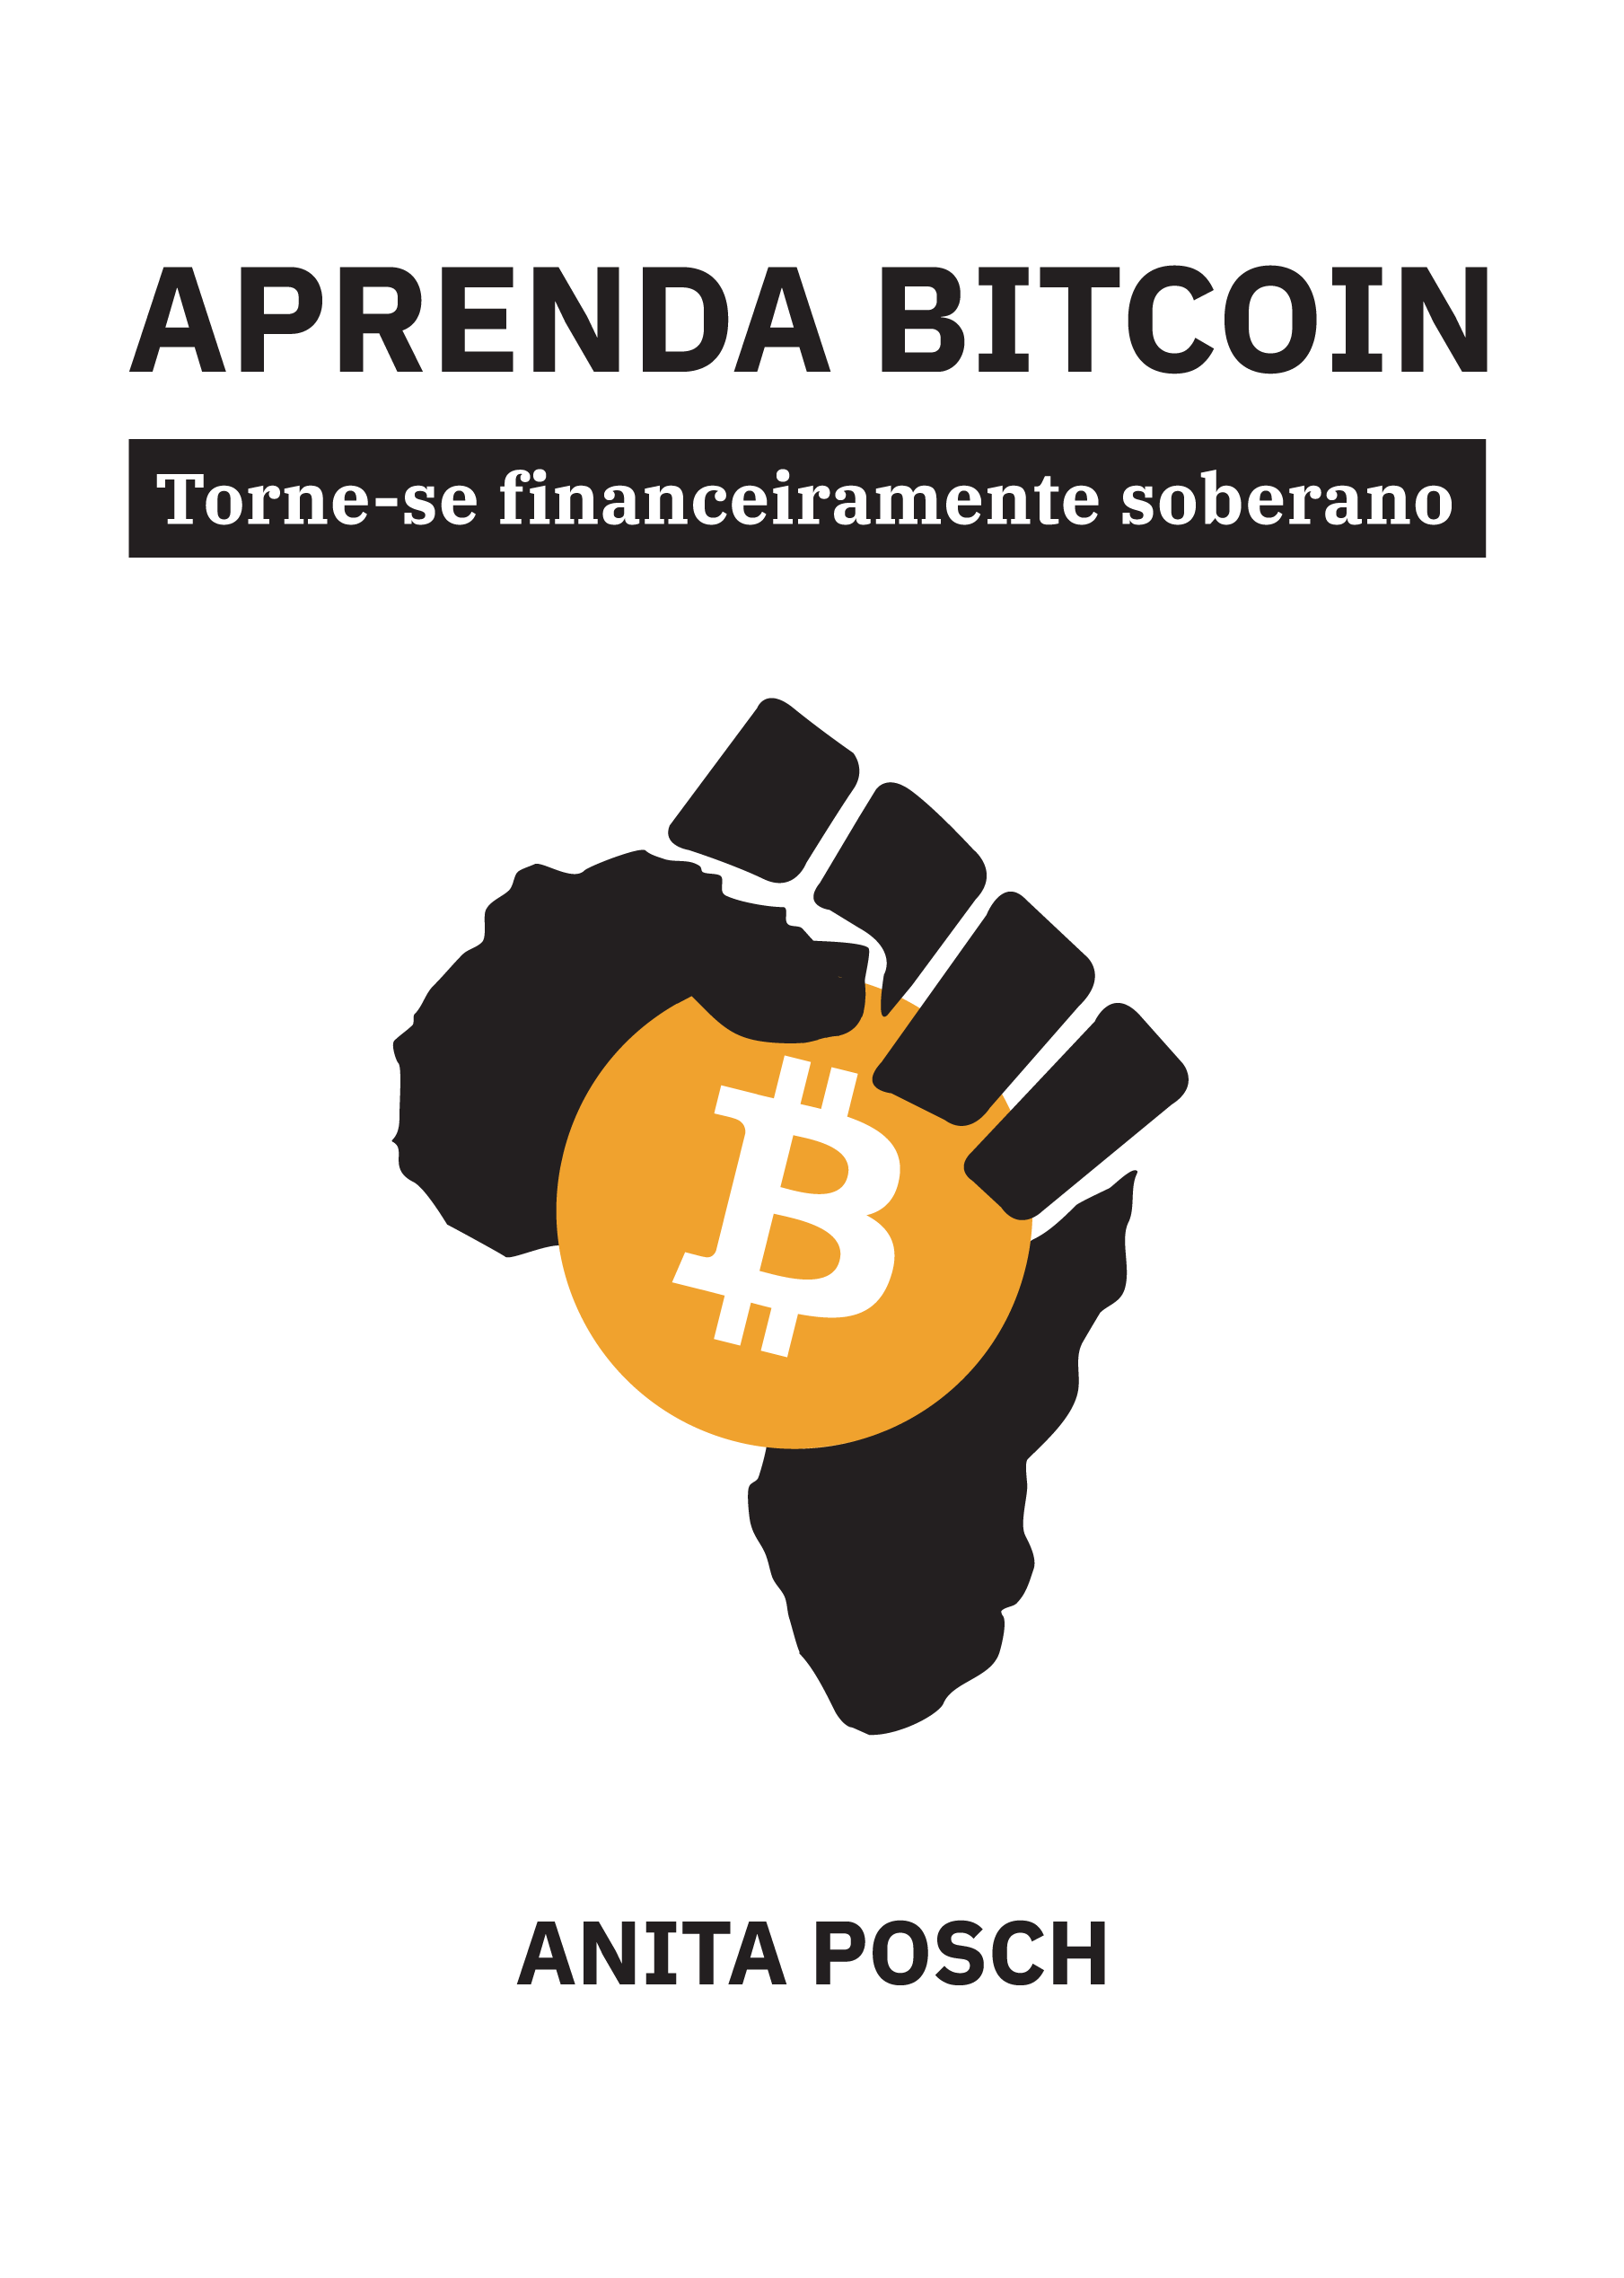 (L)earn Bitcoin book is available in Portuguese (Brazil)